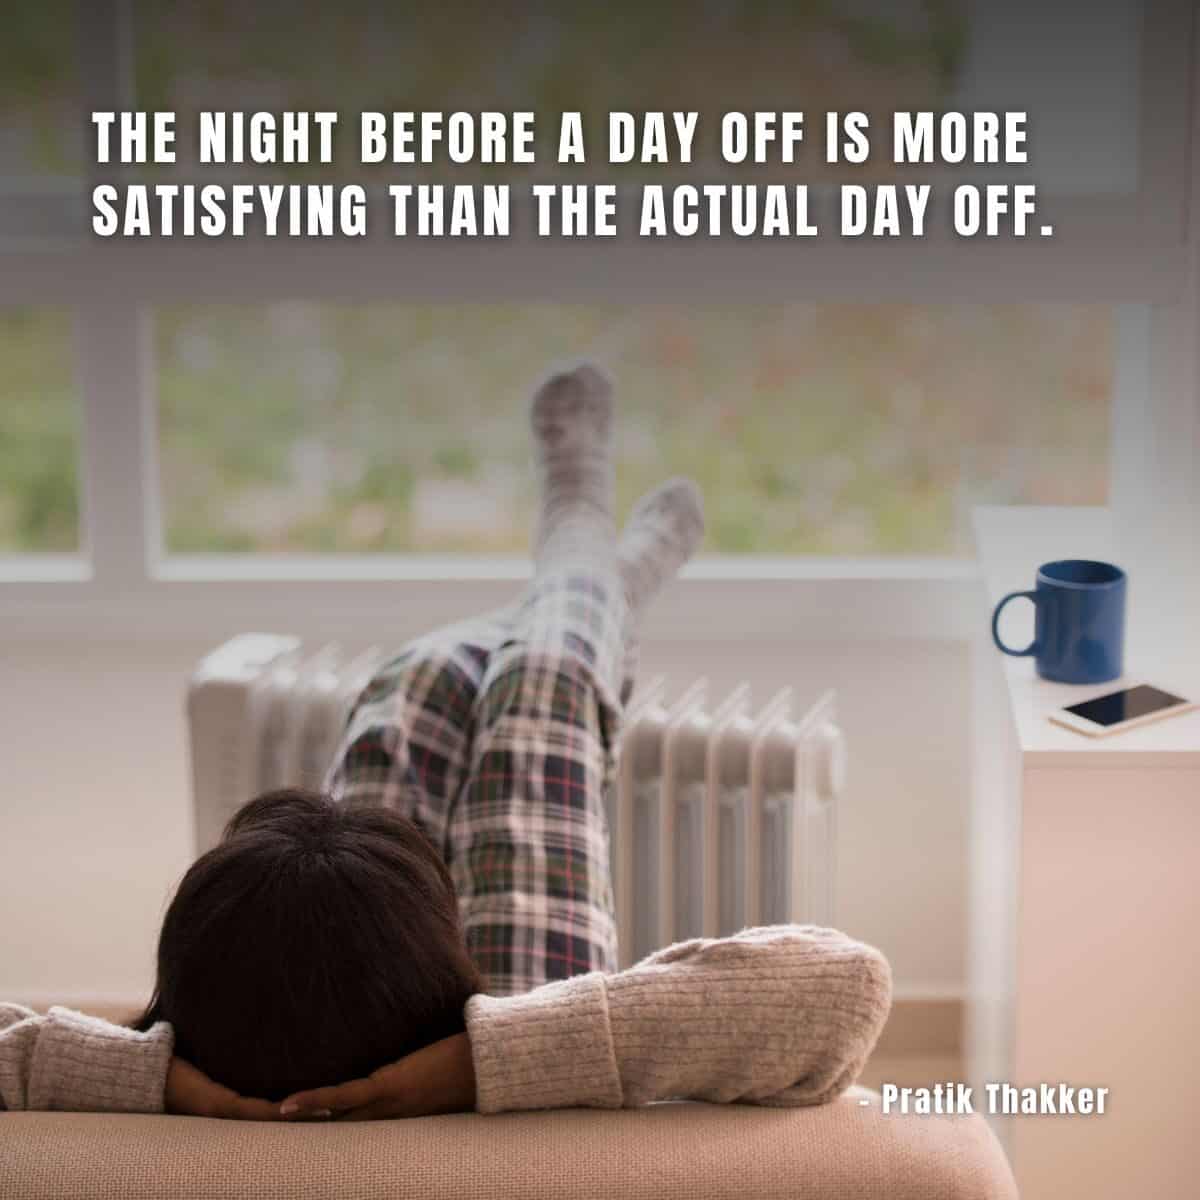 The night before a day off is more satisfying than the actual day off